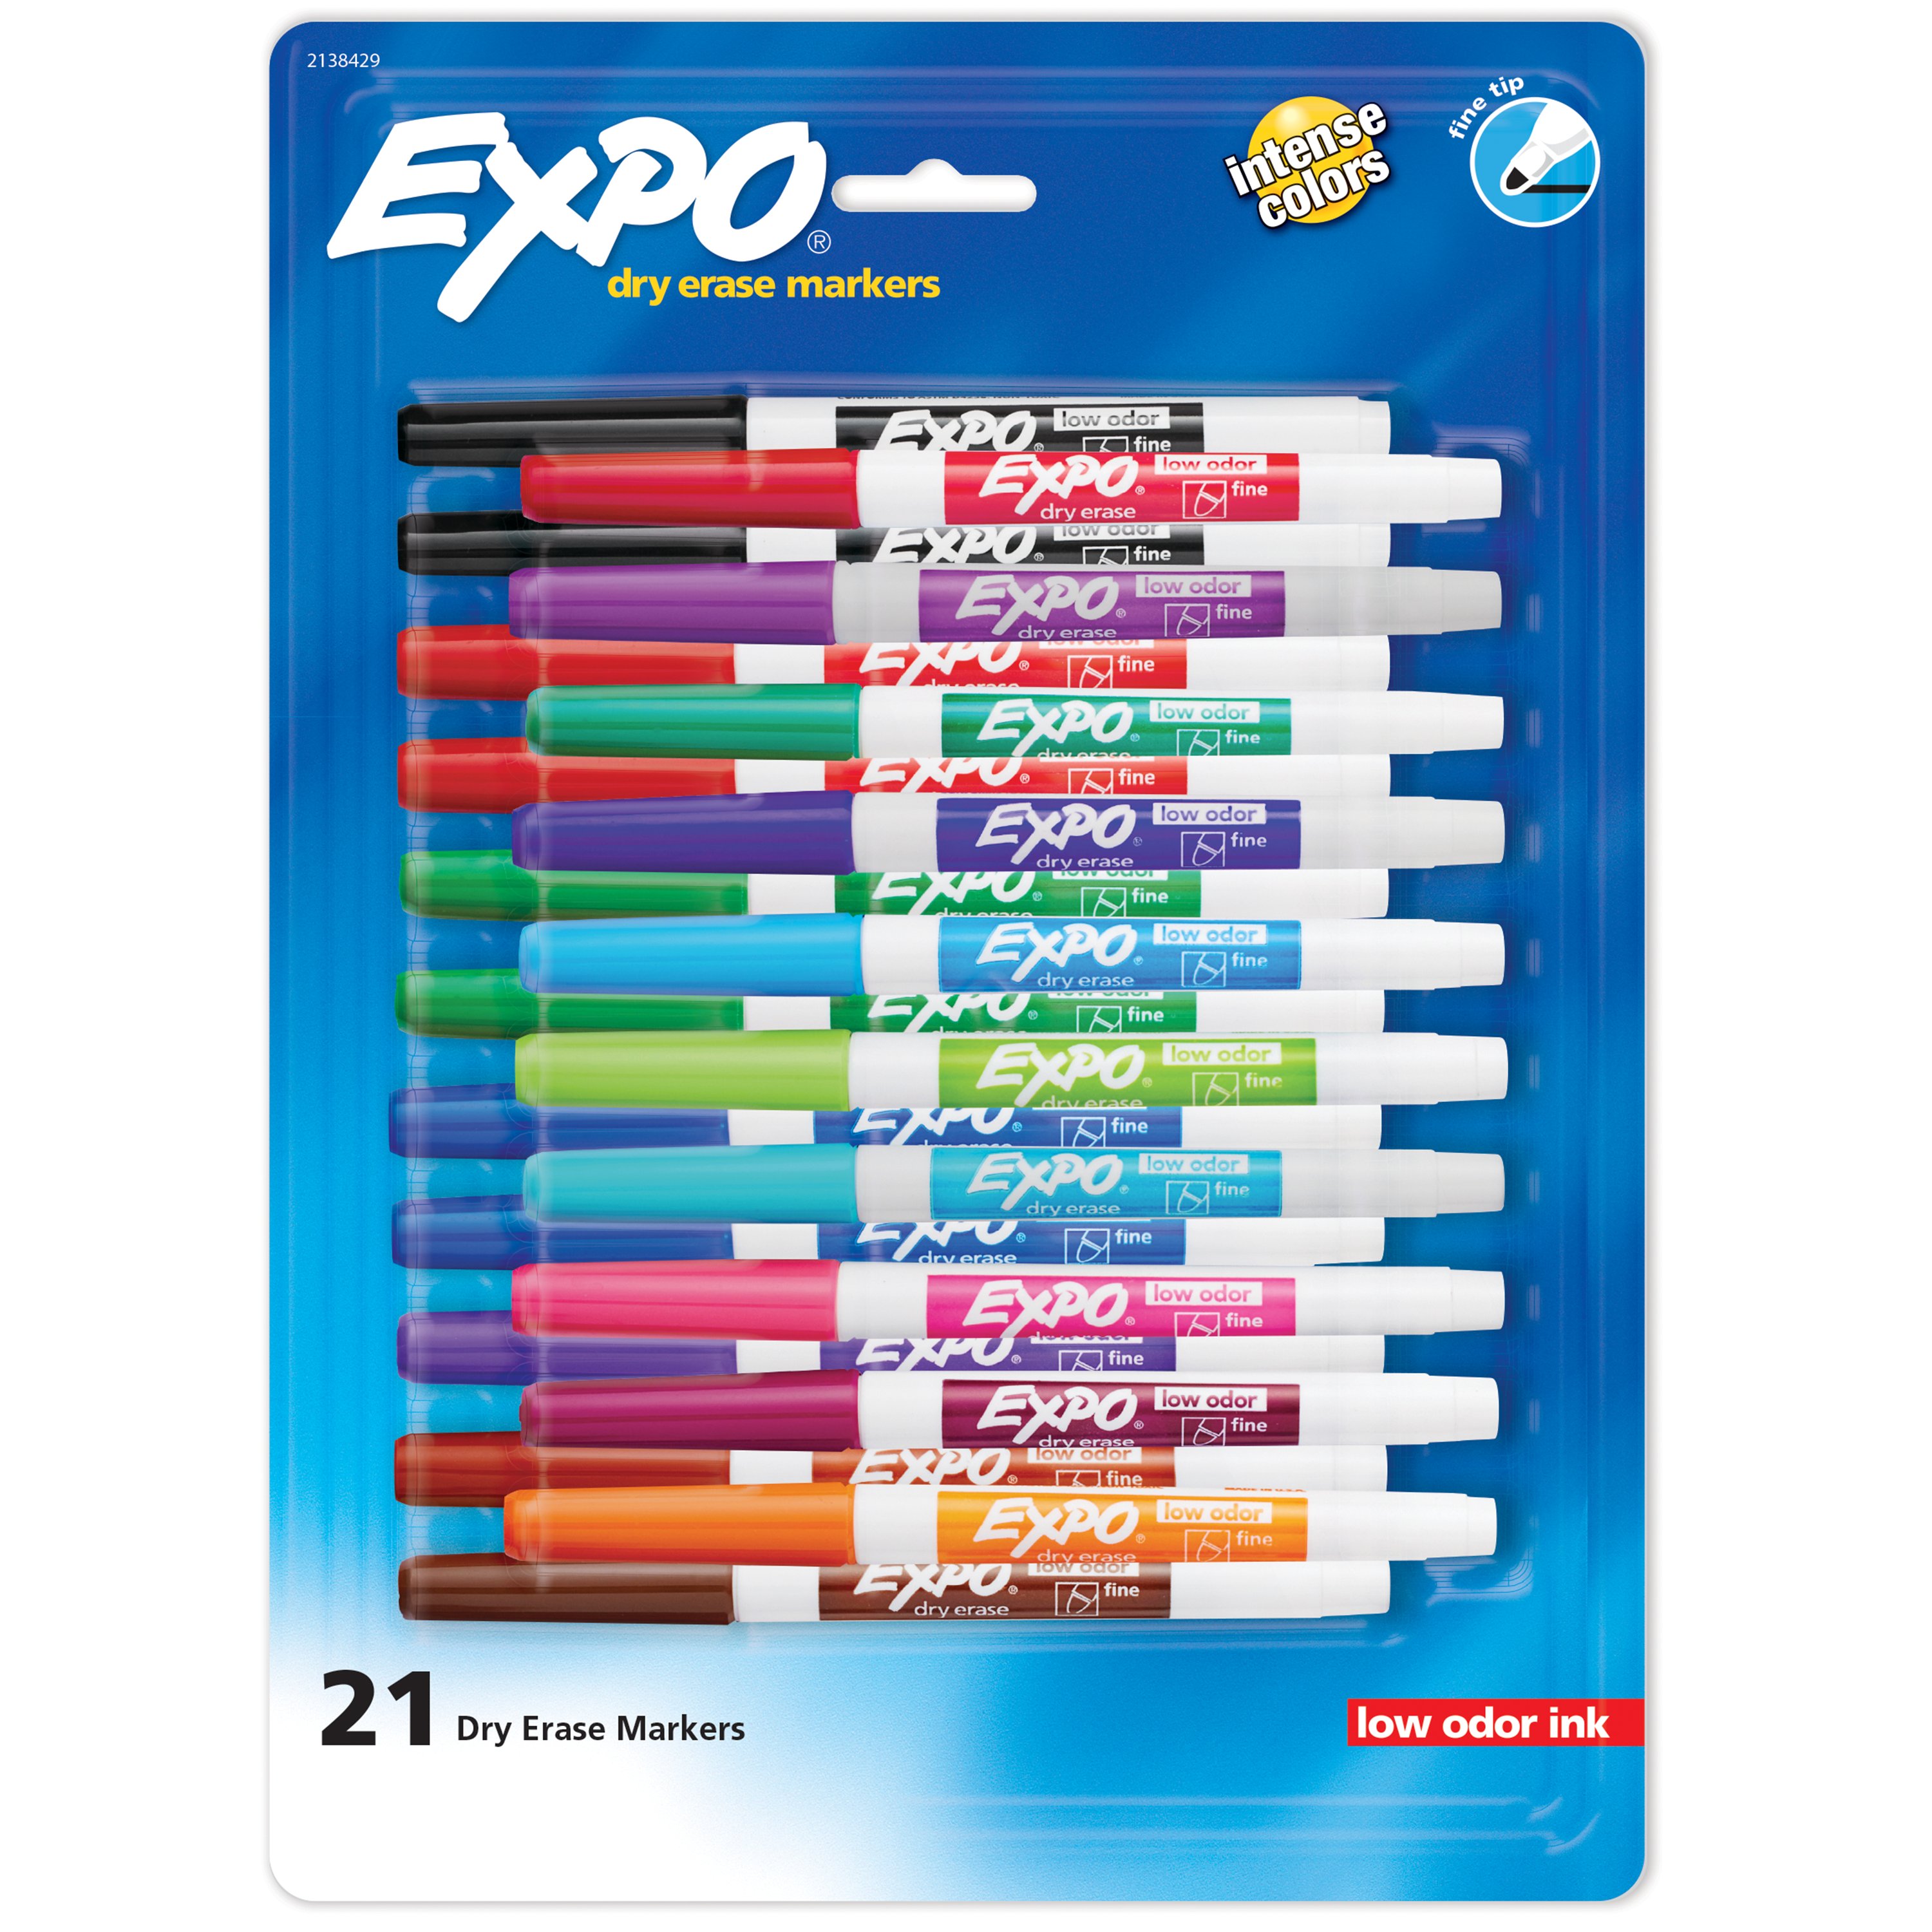 Permanent Markers Set with 18 Assorted Vibrant Colors - 36 Fine